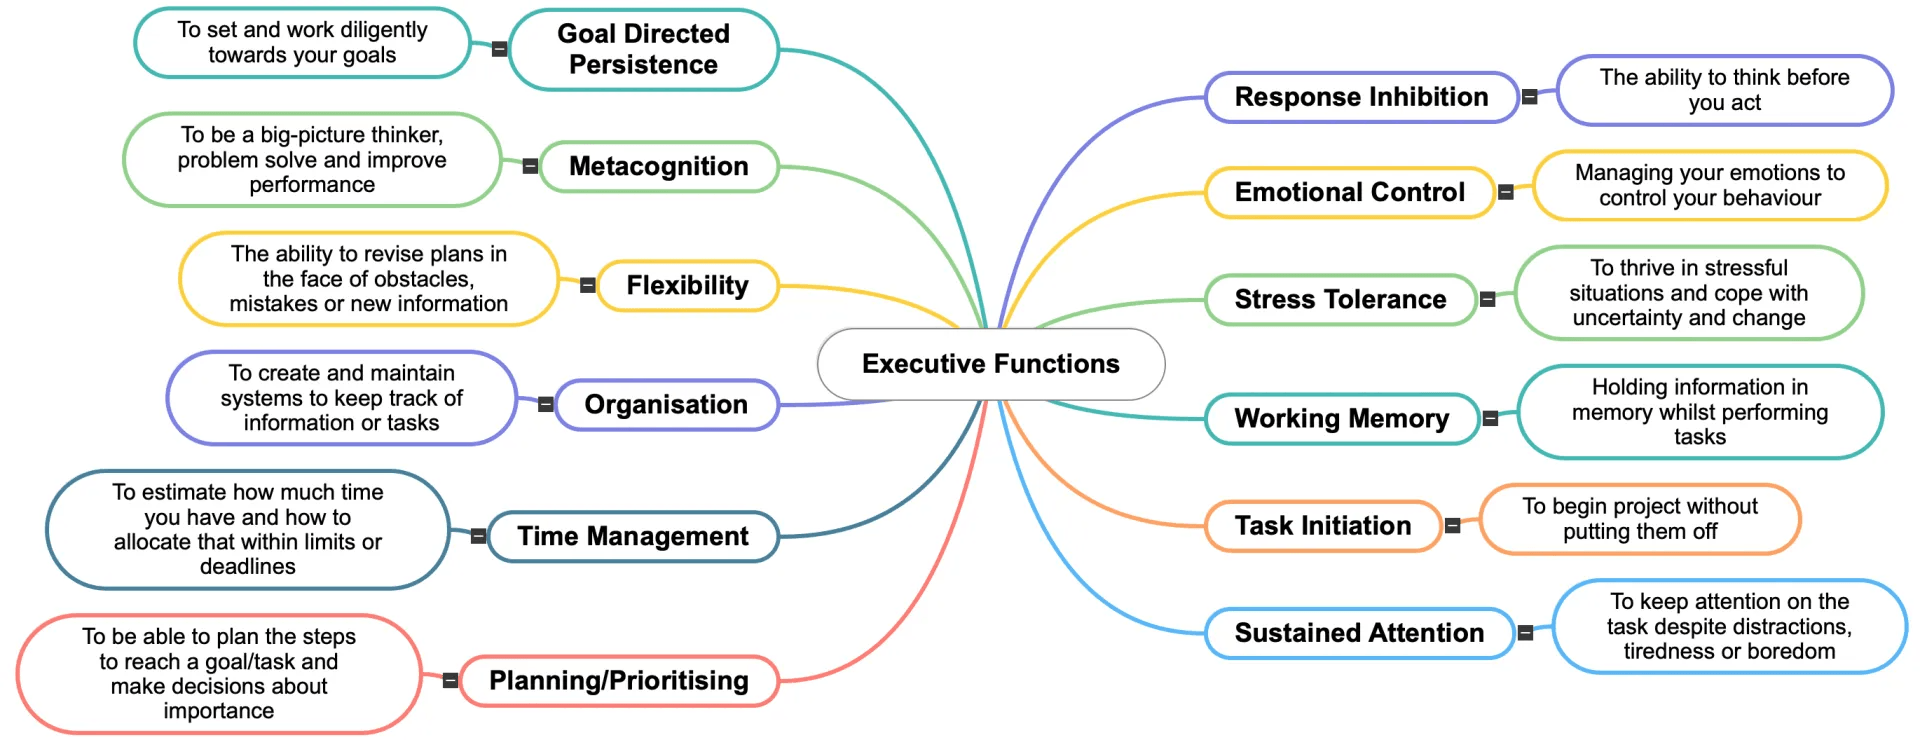 Mindmap of Executive Functions